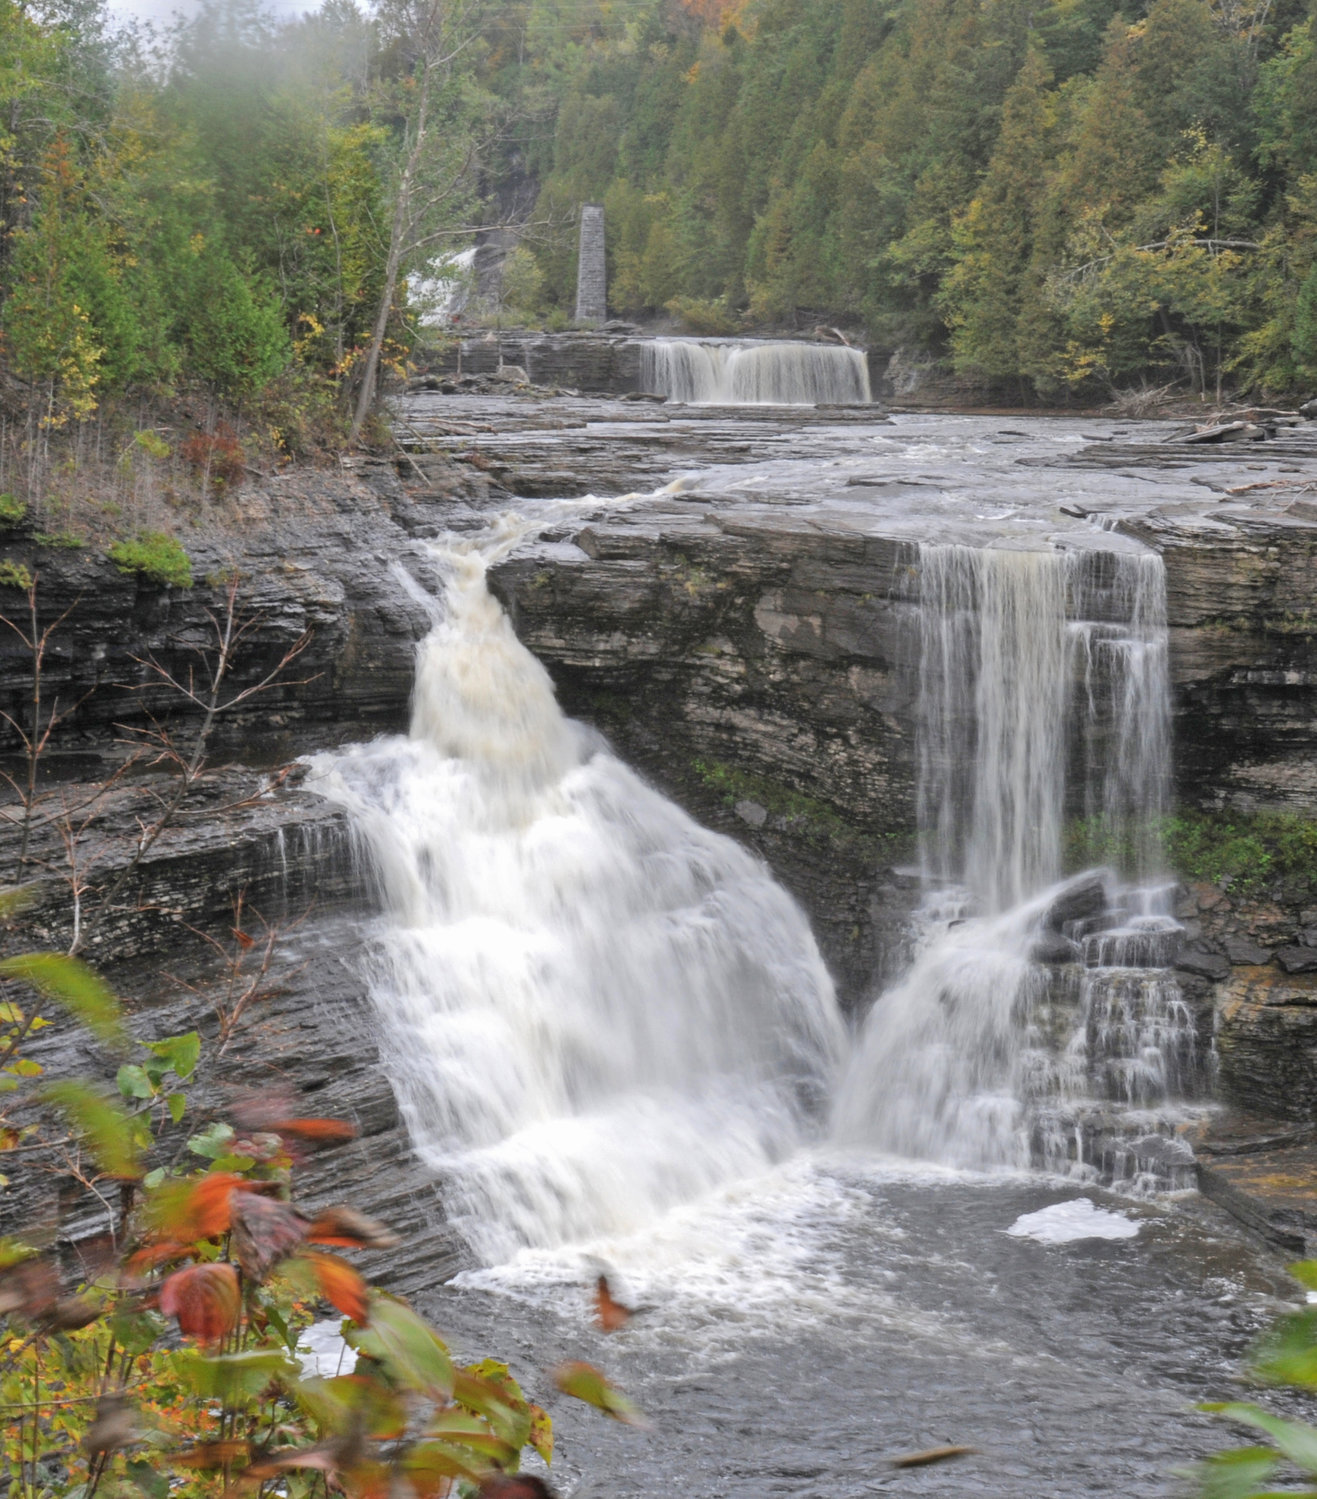 The Lower Falls of the Trenton Falls Scenic Trail are shown in this file photo. The rocks in the scenic gorge are estimated to be nearly 450 million years old. The trails will be open this weekend, Sept. 17-18, the only weekend for public viewing for the rest of this year.